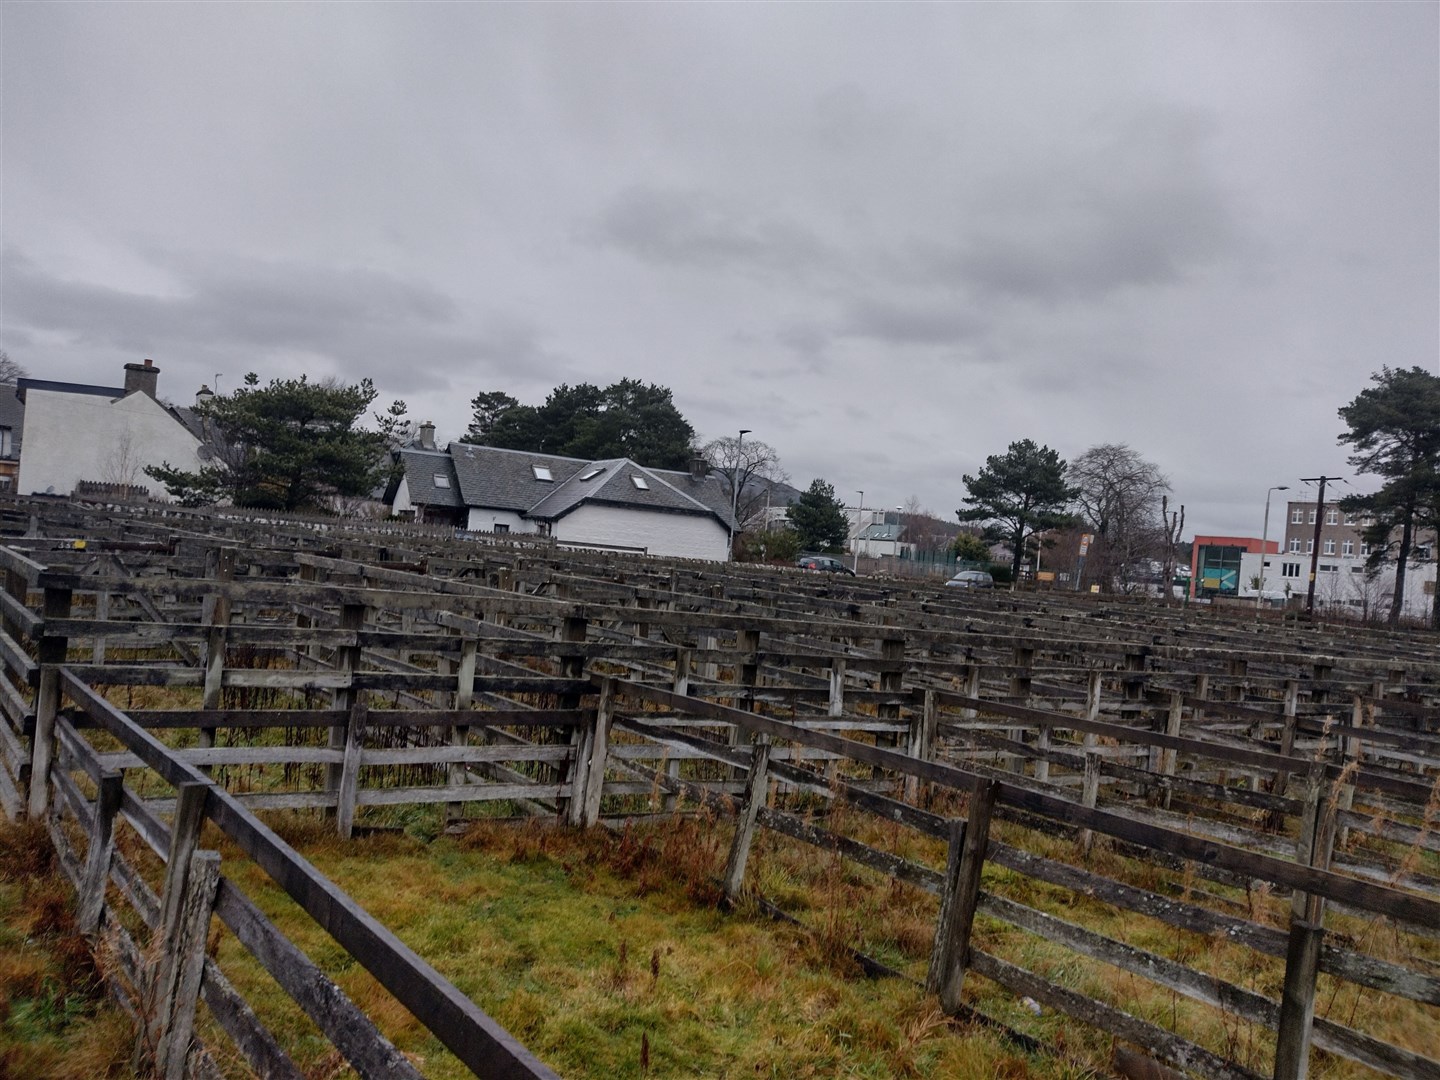 The market pens at Kingussie.